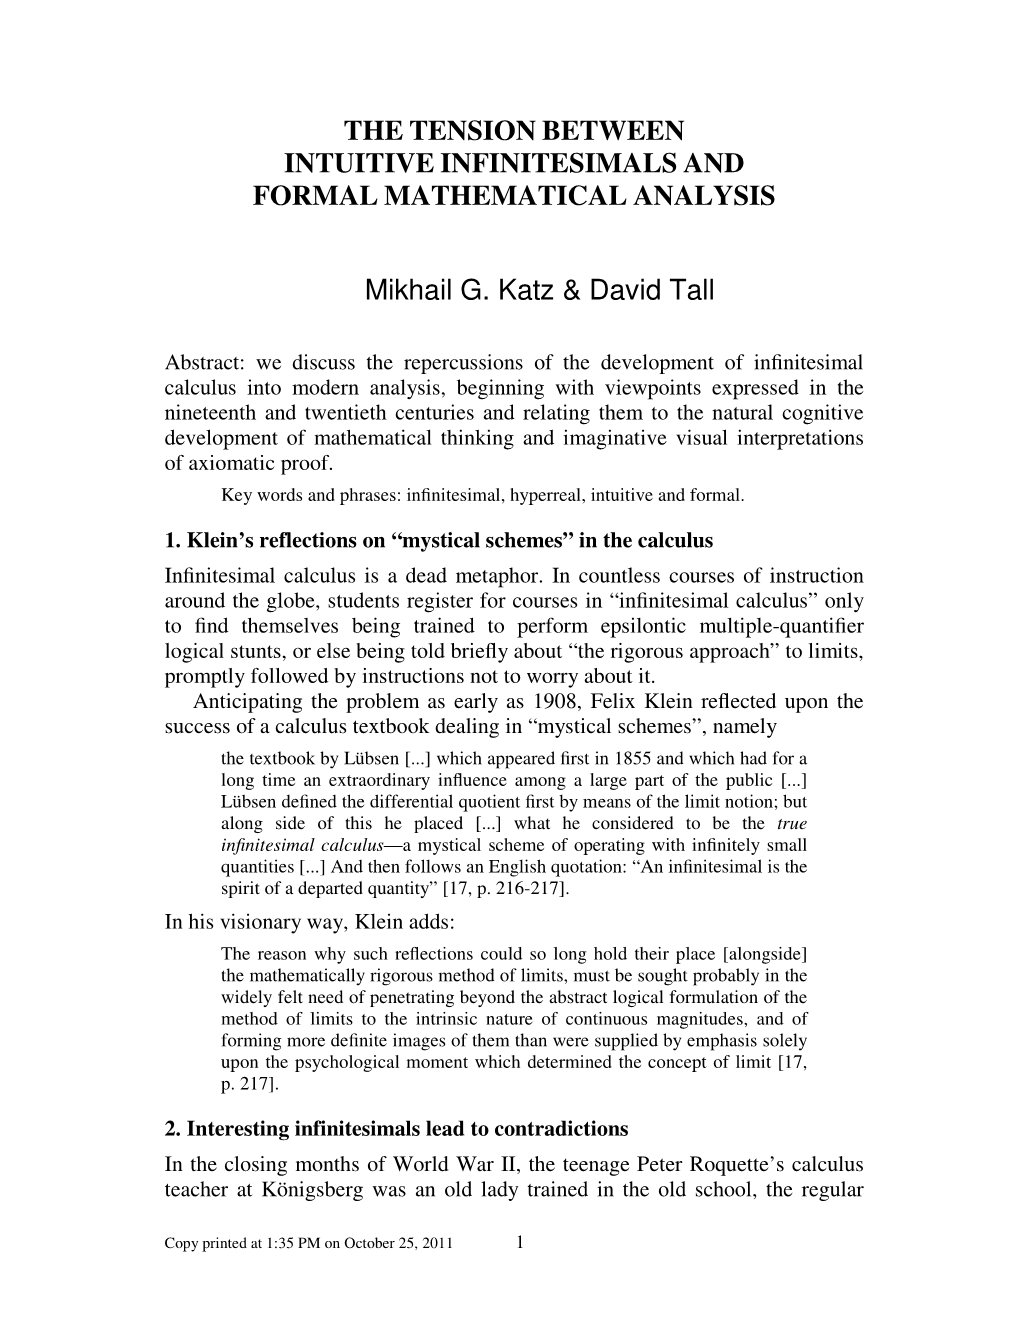 The Tension Between Intuitive Infinitesimals and Formal Mathematical Analysis